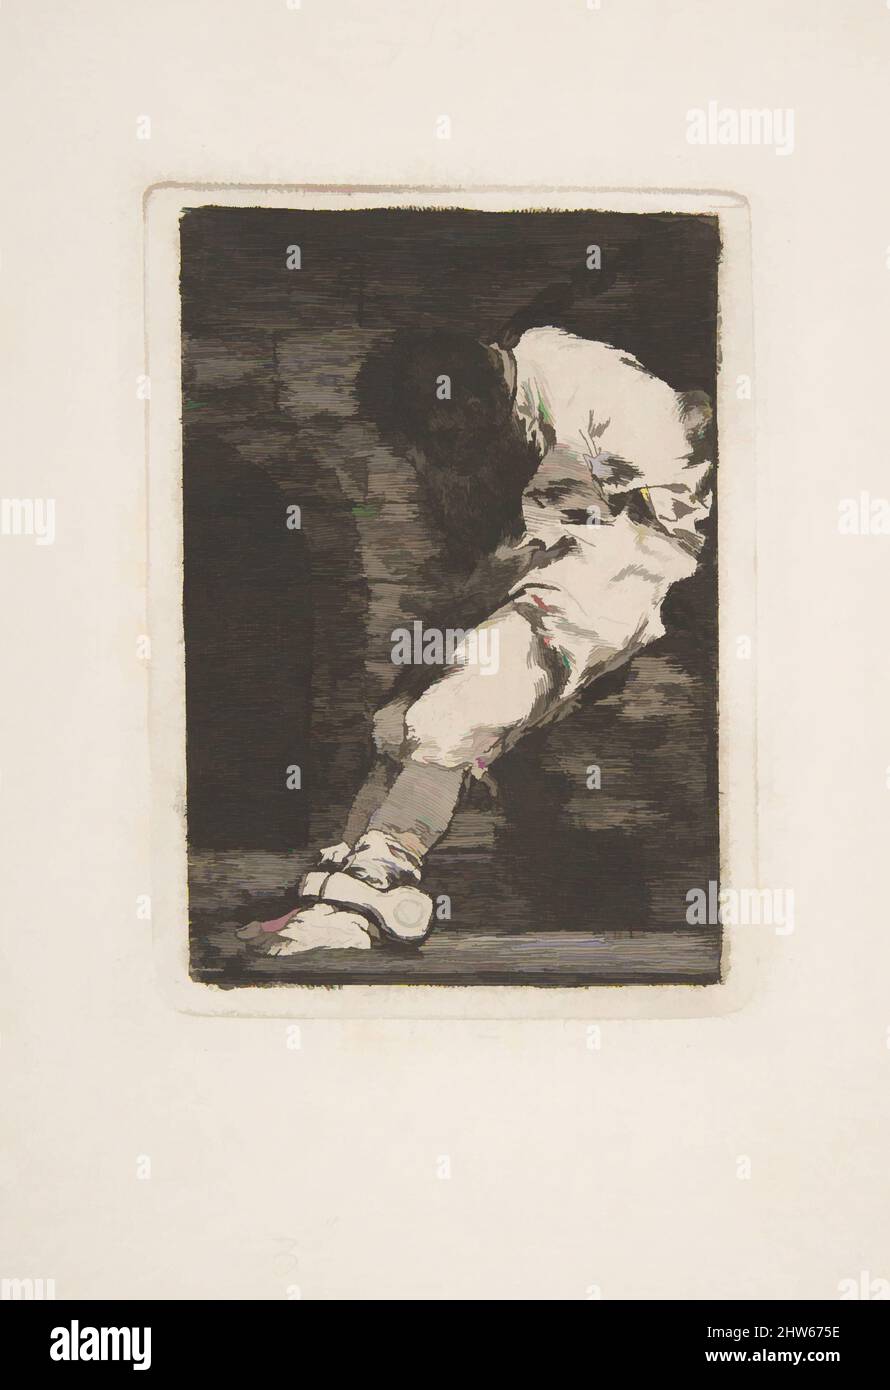 Art inspired by If he Is guilty, let him die quickly (Si es deliquente qe. muera presto), ca. 1815, Etching, printed in black ink with platetone, Plate: 4 9/16 × 3 3/4 in. (11.6 × 9.5 cm), Prints, Goya (Francisco de Goya y Lucientes) (Spanish, Fuendetodos 1746–1828 Bordeaux, Classic works modernized by Artotop with a splash of modernity. Shapes, color and value, eye-catching visual impact on art. Emotions through freedom of artworks in a contemporary way. A timeless message pursuing a wildly creative new direction. Artists turning to the digital medium and creating the Artotop NFT Stock Photo